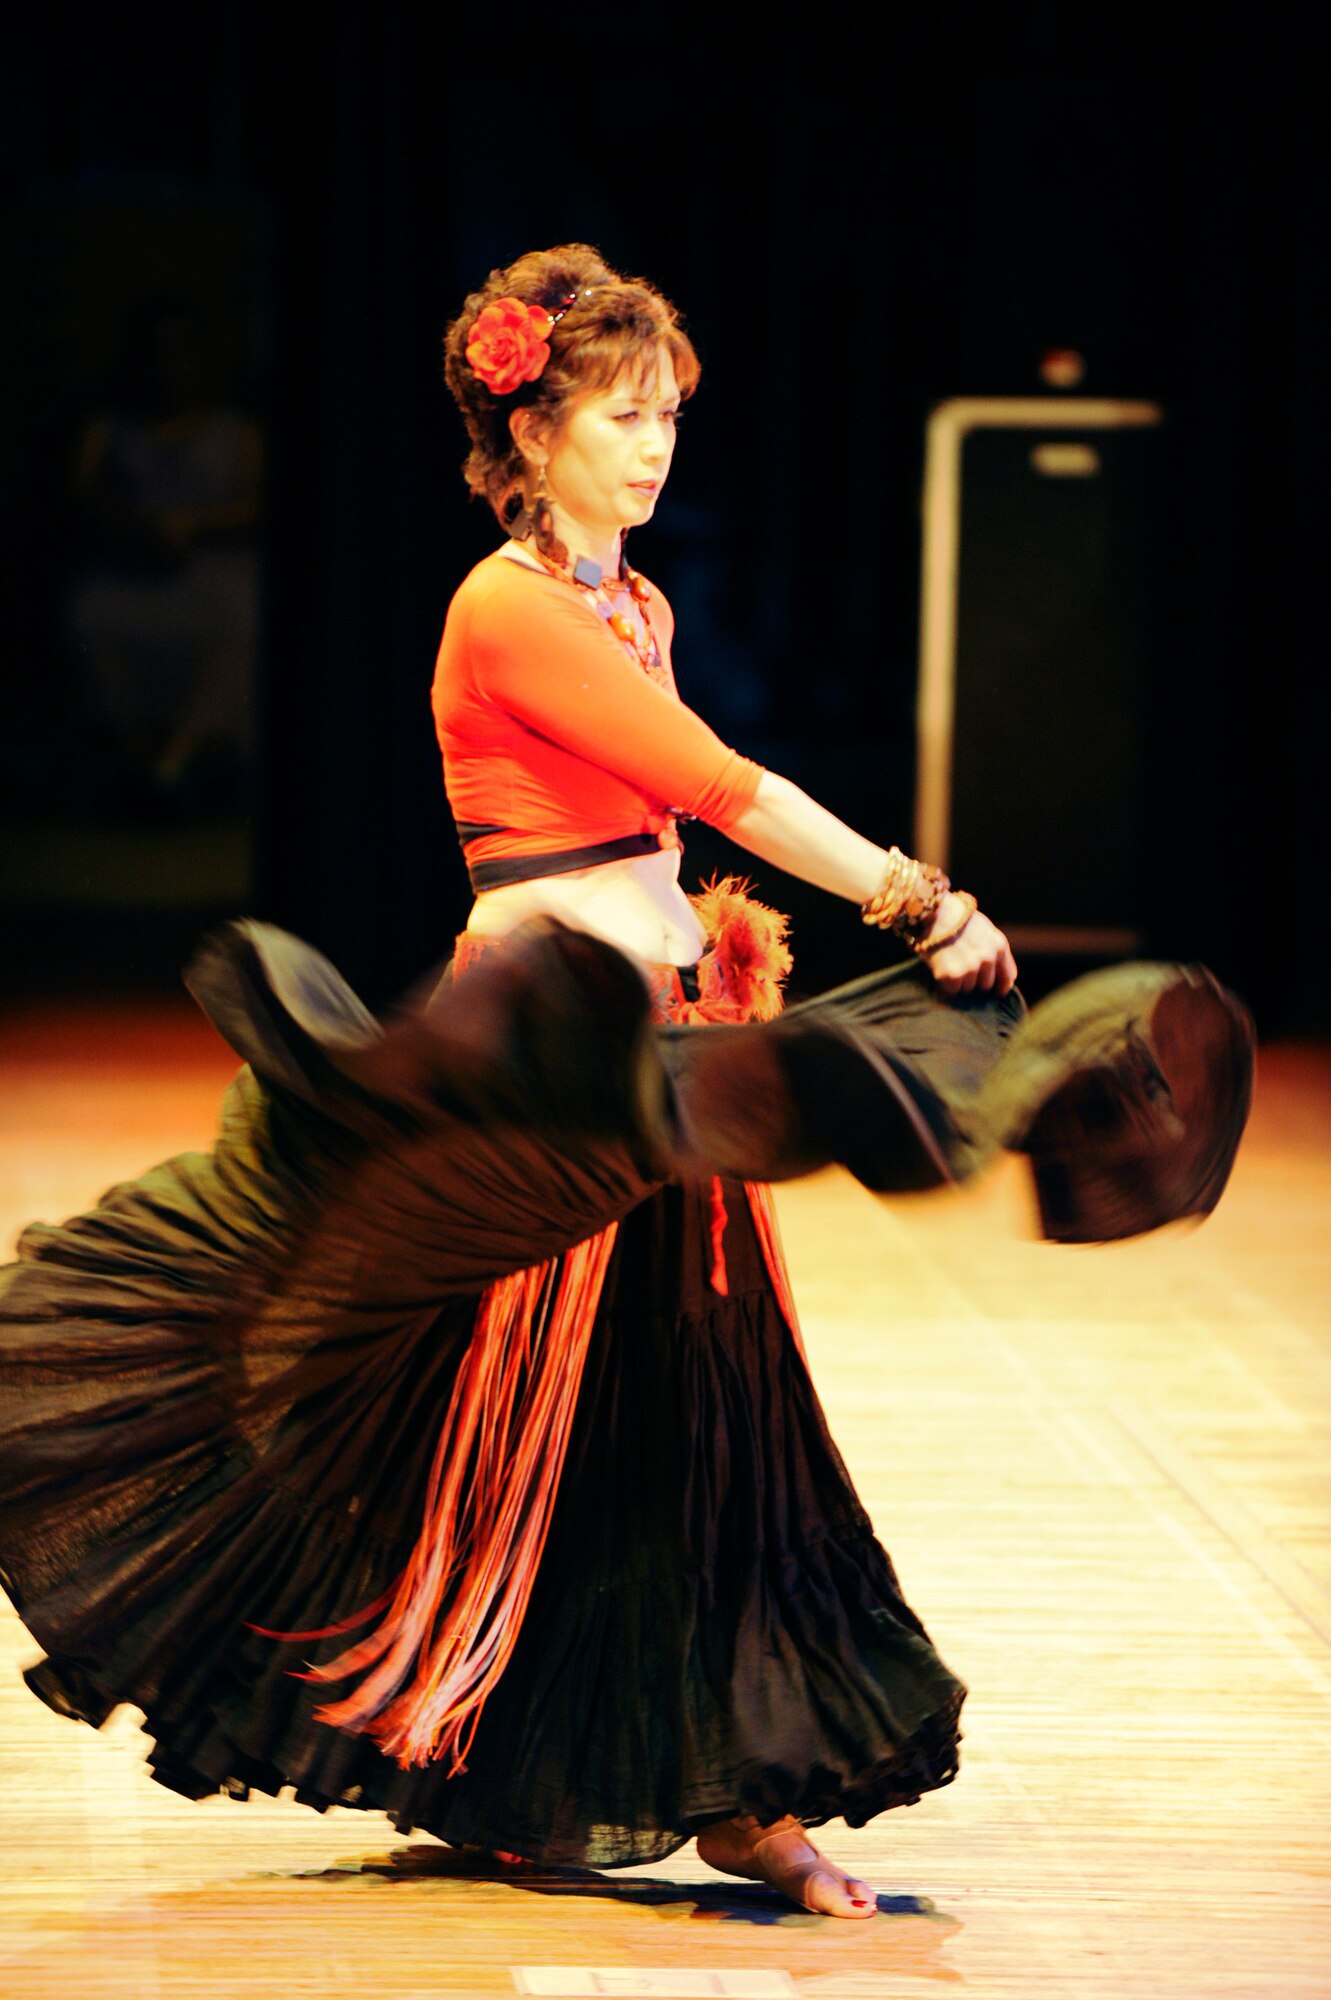 MISAWA CITY, Japan -- Satou Hiroko spins her dress while dancing "Gypsy Trail" at the Misawa Civic Center June 7, 2009. Several American and American-lead music and dance groups performed inside the Civic Center to share their art with the Japanese audience during the American Day festival. (U.S. Air Force photo by Staff Sgt. Samuel Morse)